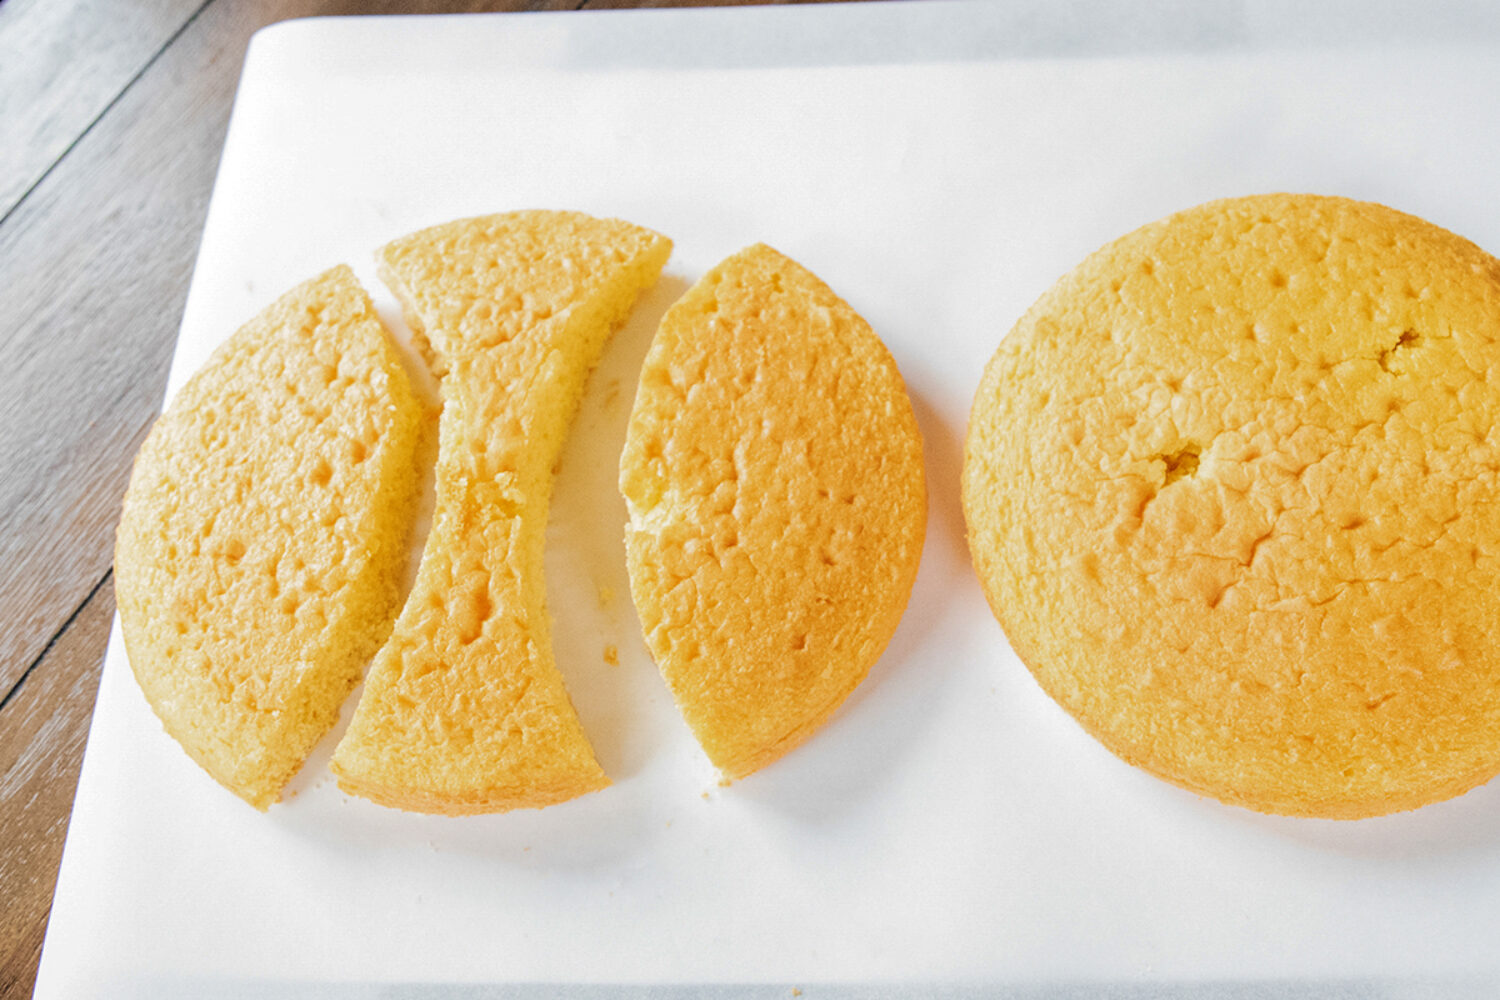 Two round cakes, with one cut into unusual shapes